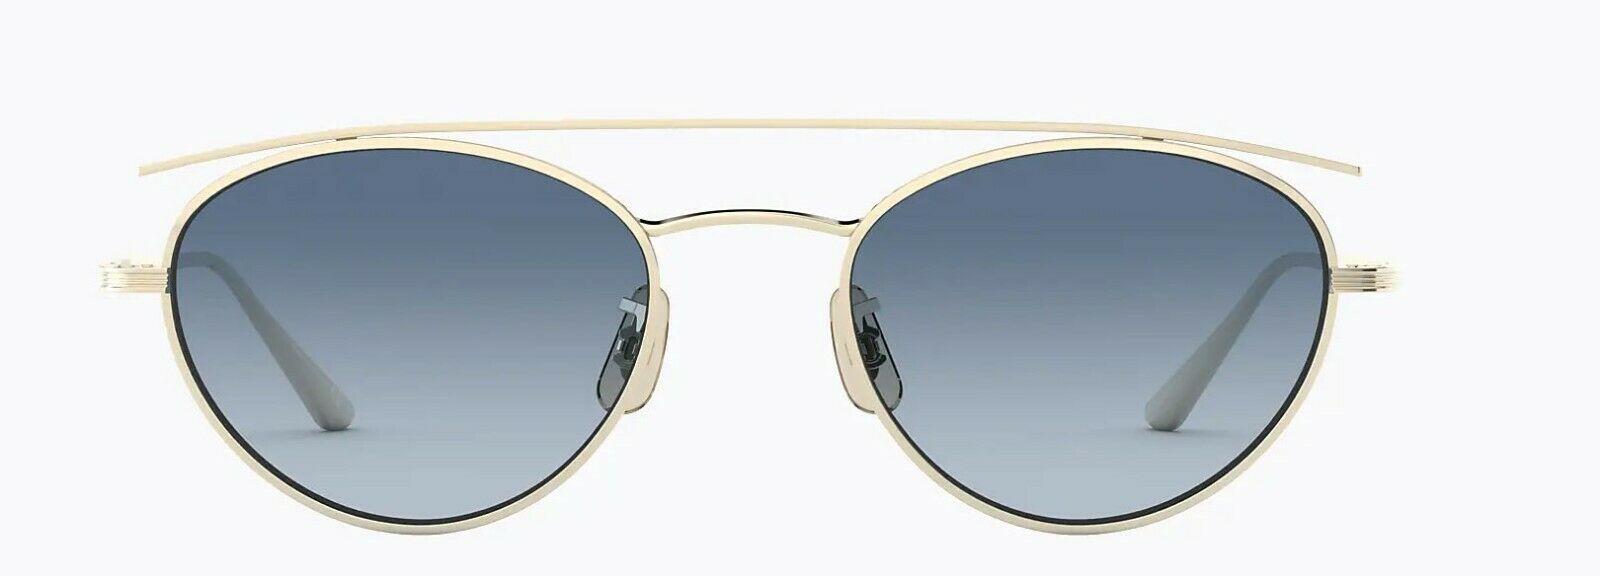 Oliver Peoples Sunglasses 1258ST 5035Q8 The Row Hightree Gold / Marine Gradient-827934432628-classypw.com-1